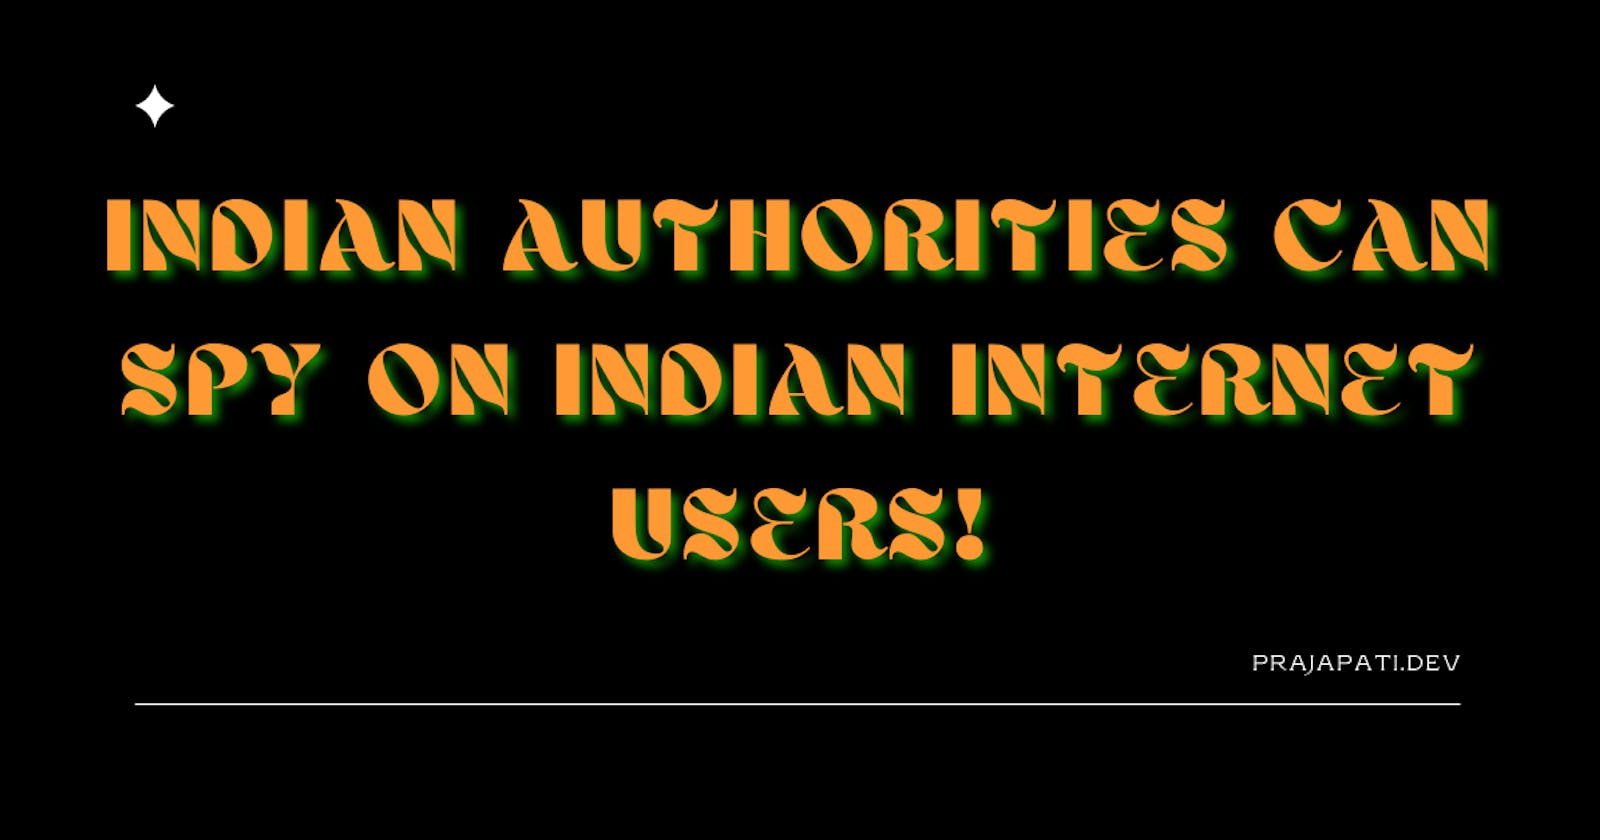 India's internet privacy in danger": "India's Government Surveillance: What it Means for Your Privacy